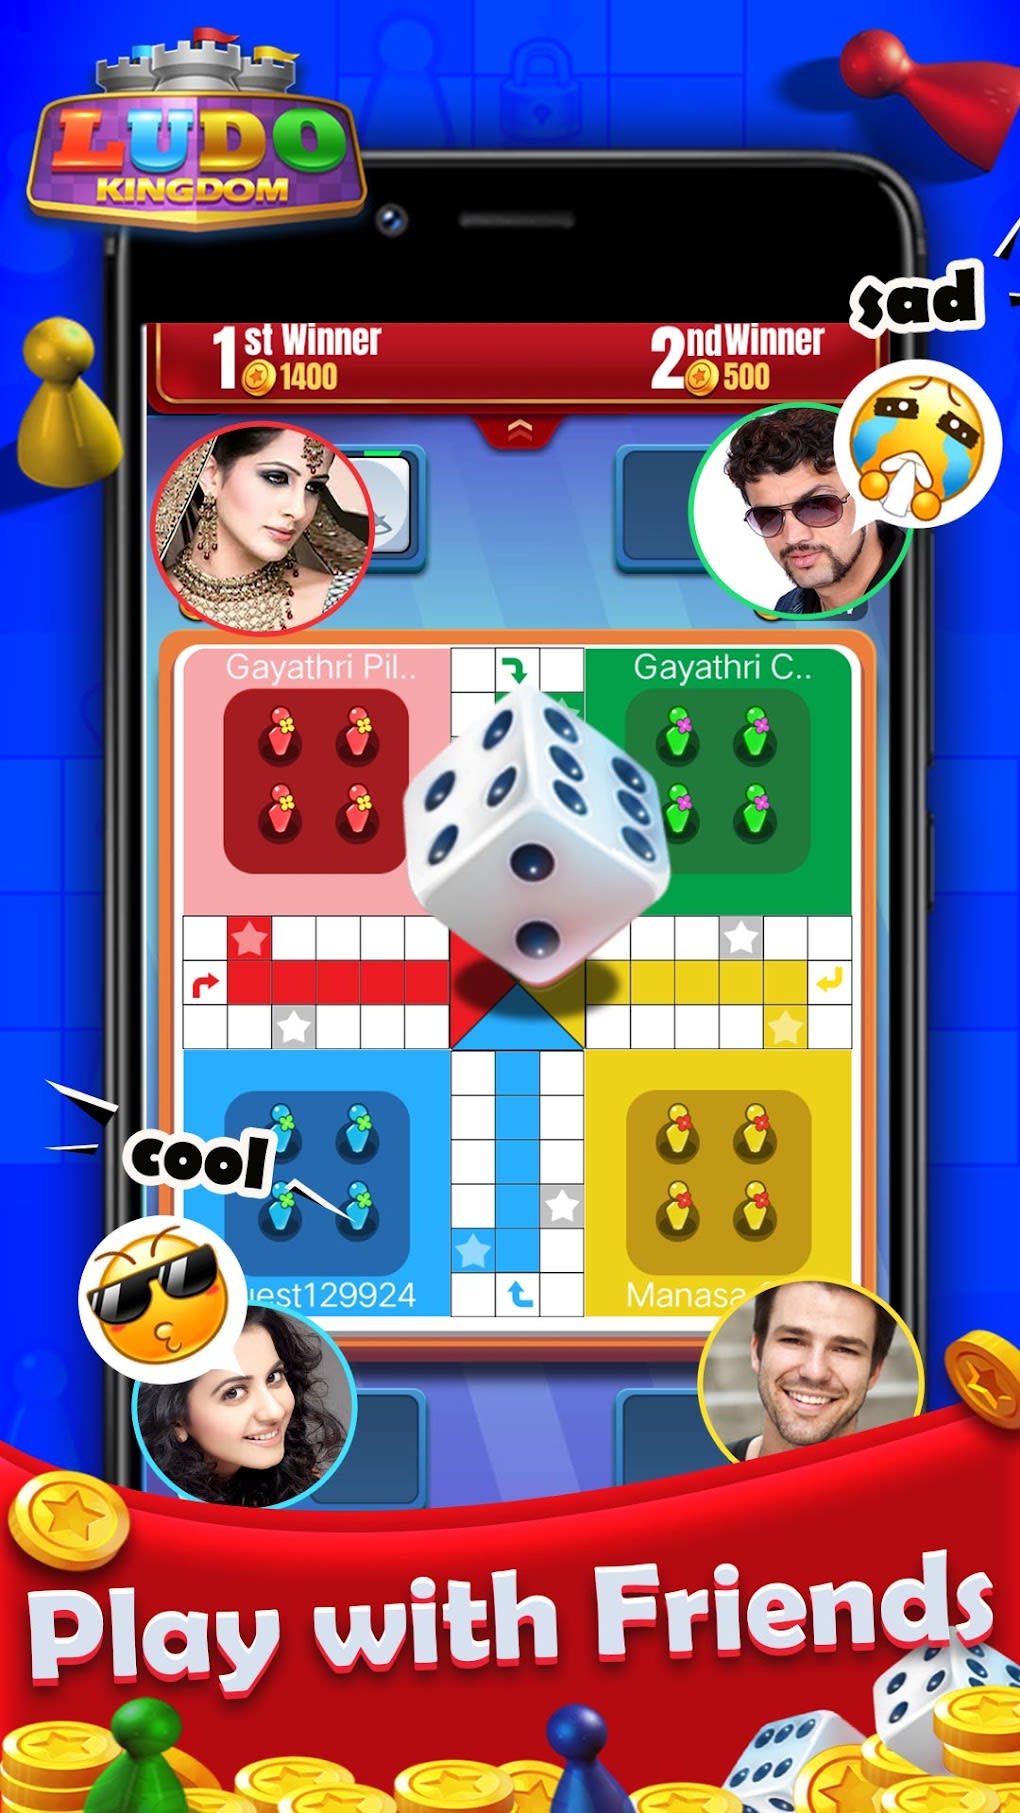 Ludo Kingdom Board Online Game for Android